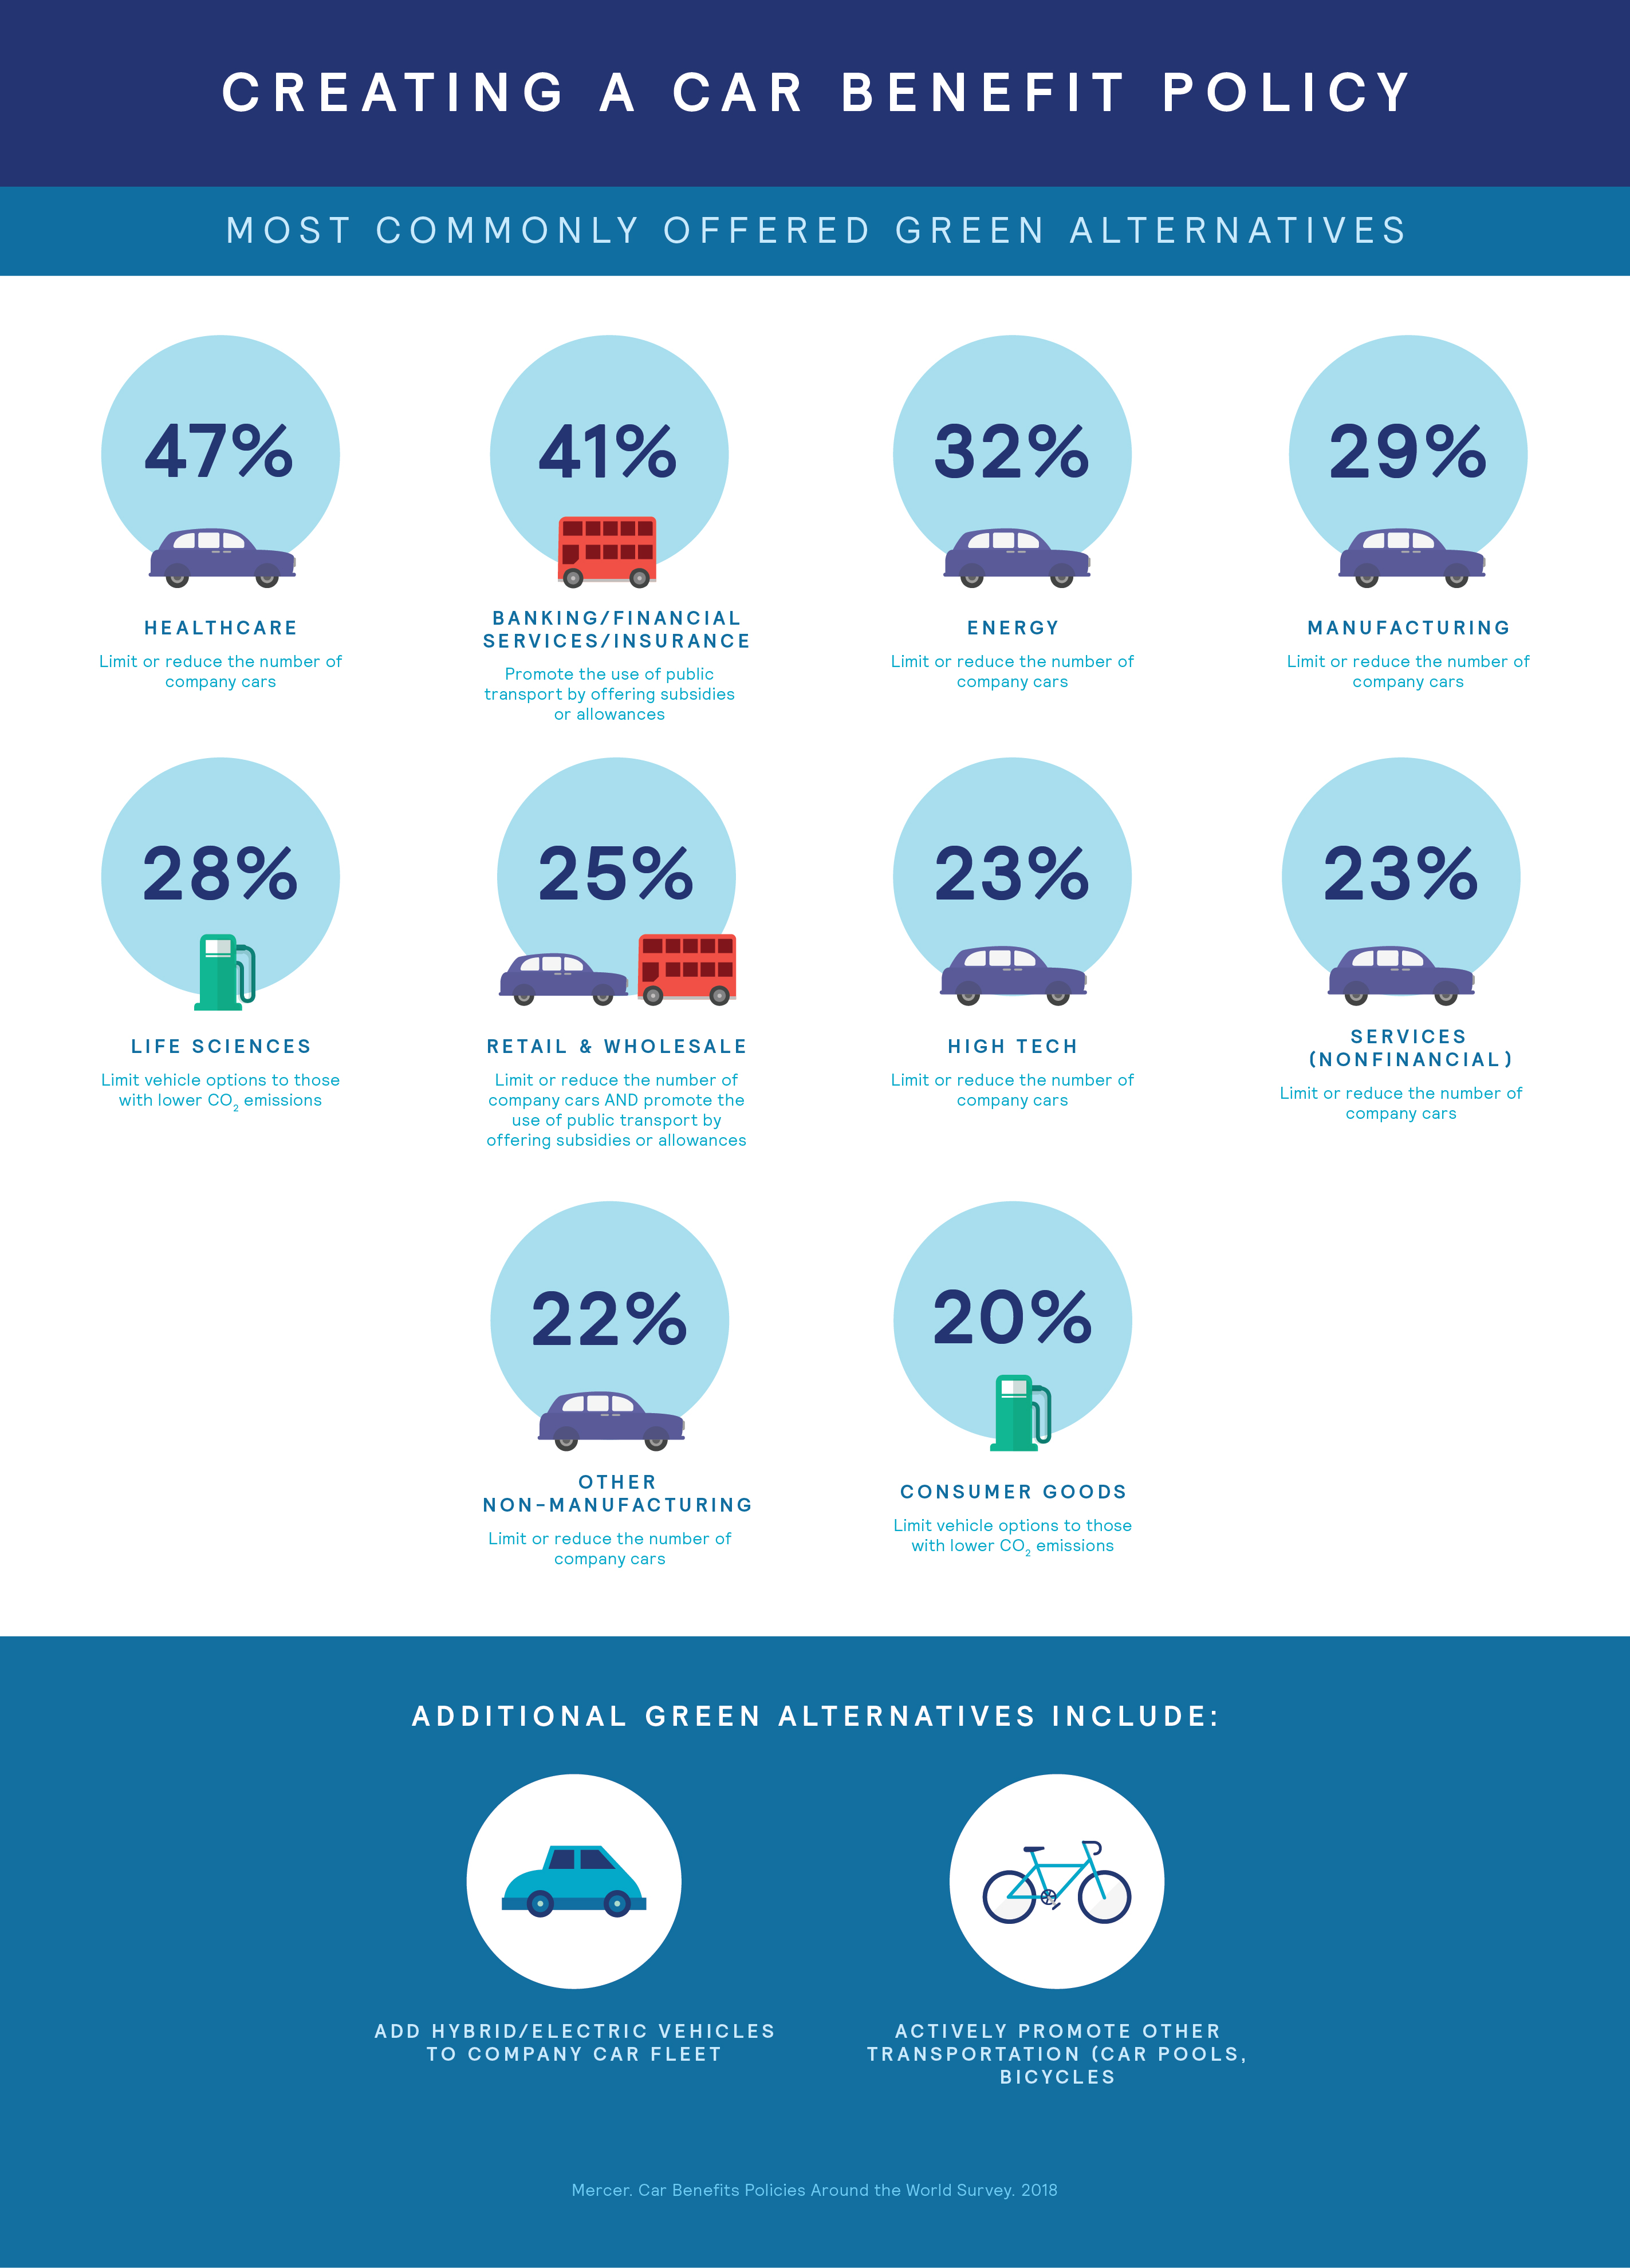 Creating a car benefit policy most commonly offered green alternatives infographic image